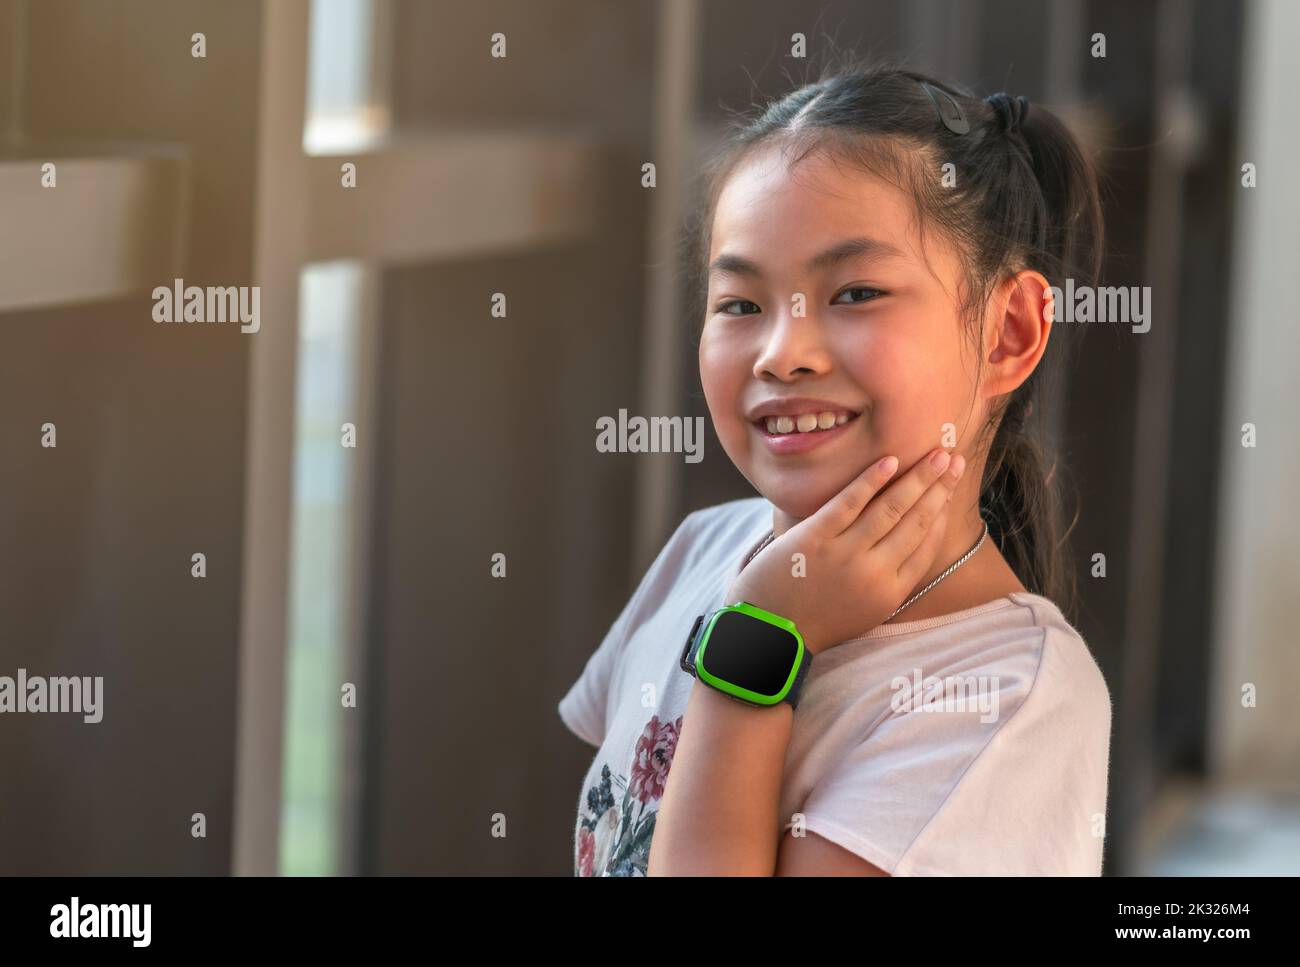 Portrait of cute Asian child girl, standing next to glass window, smiling and looking at camera, cute pose with one hand touching at cheek, wearing di Stock Photo